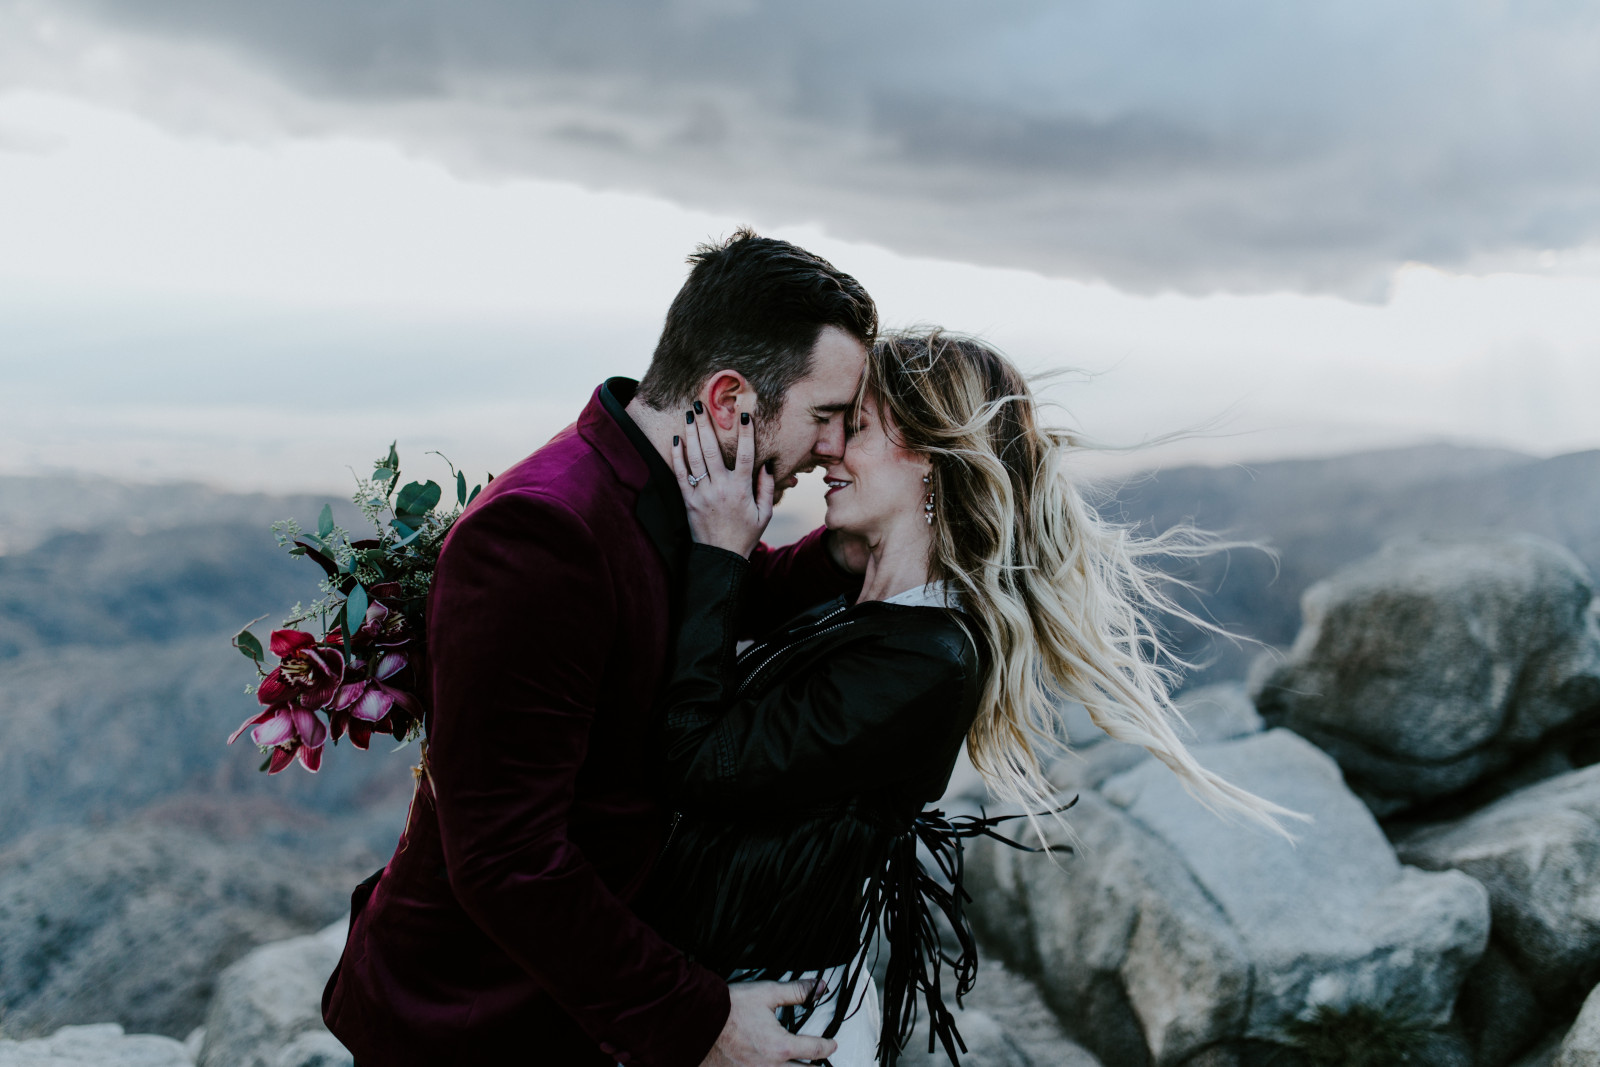 Jeremy and Alyssa face each other. Elopement wedding photography at Joshua Tree National Park by Sienna Plus Josh.